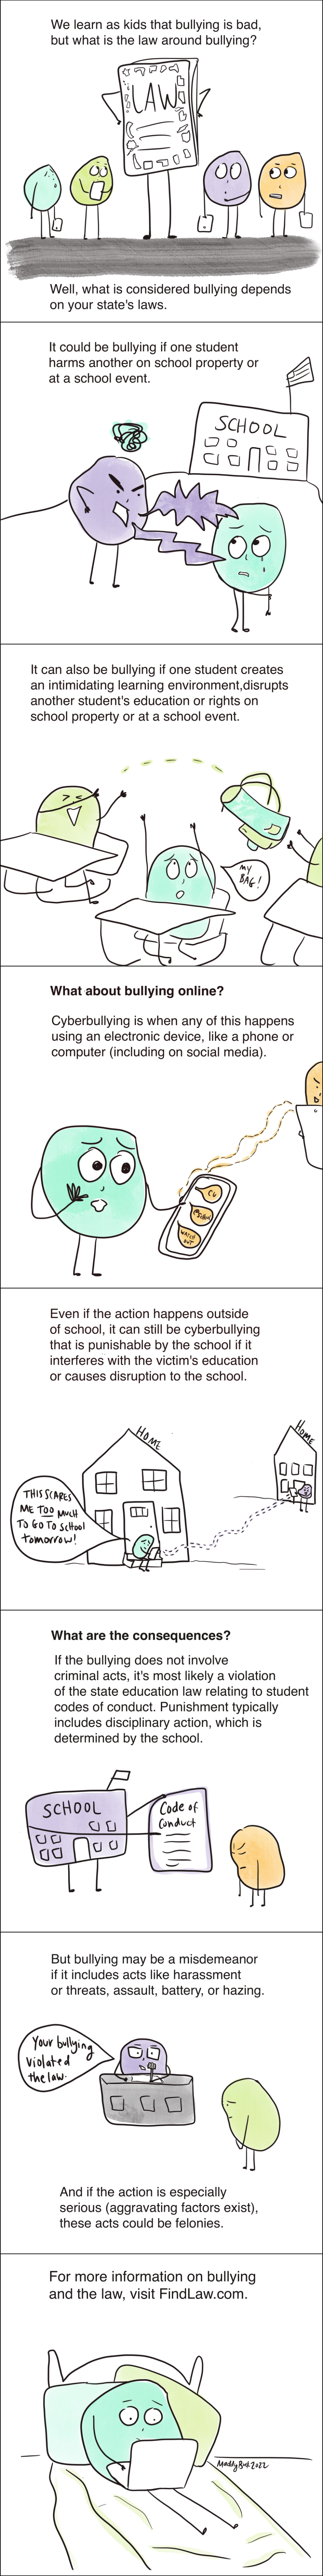 A comic illustrating whether bullying and cyberbullying are legal